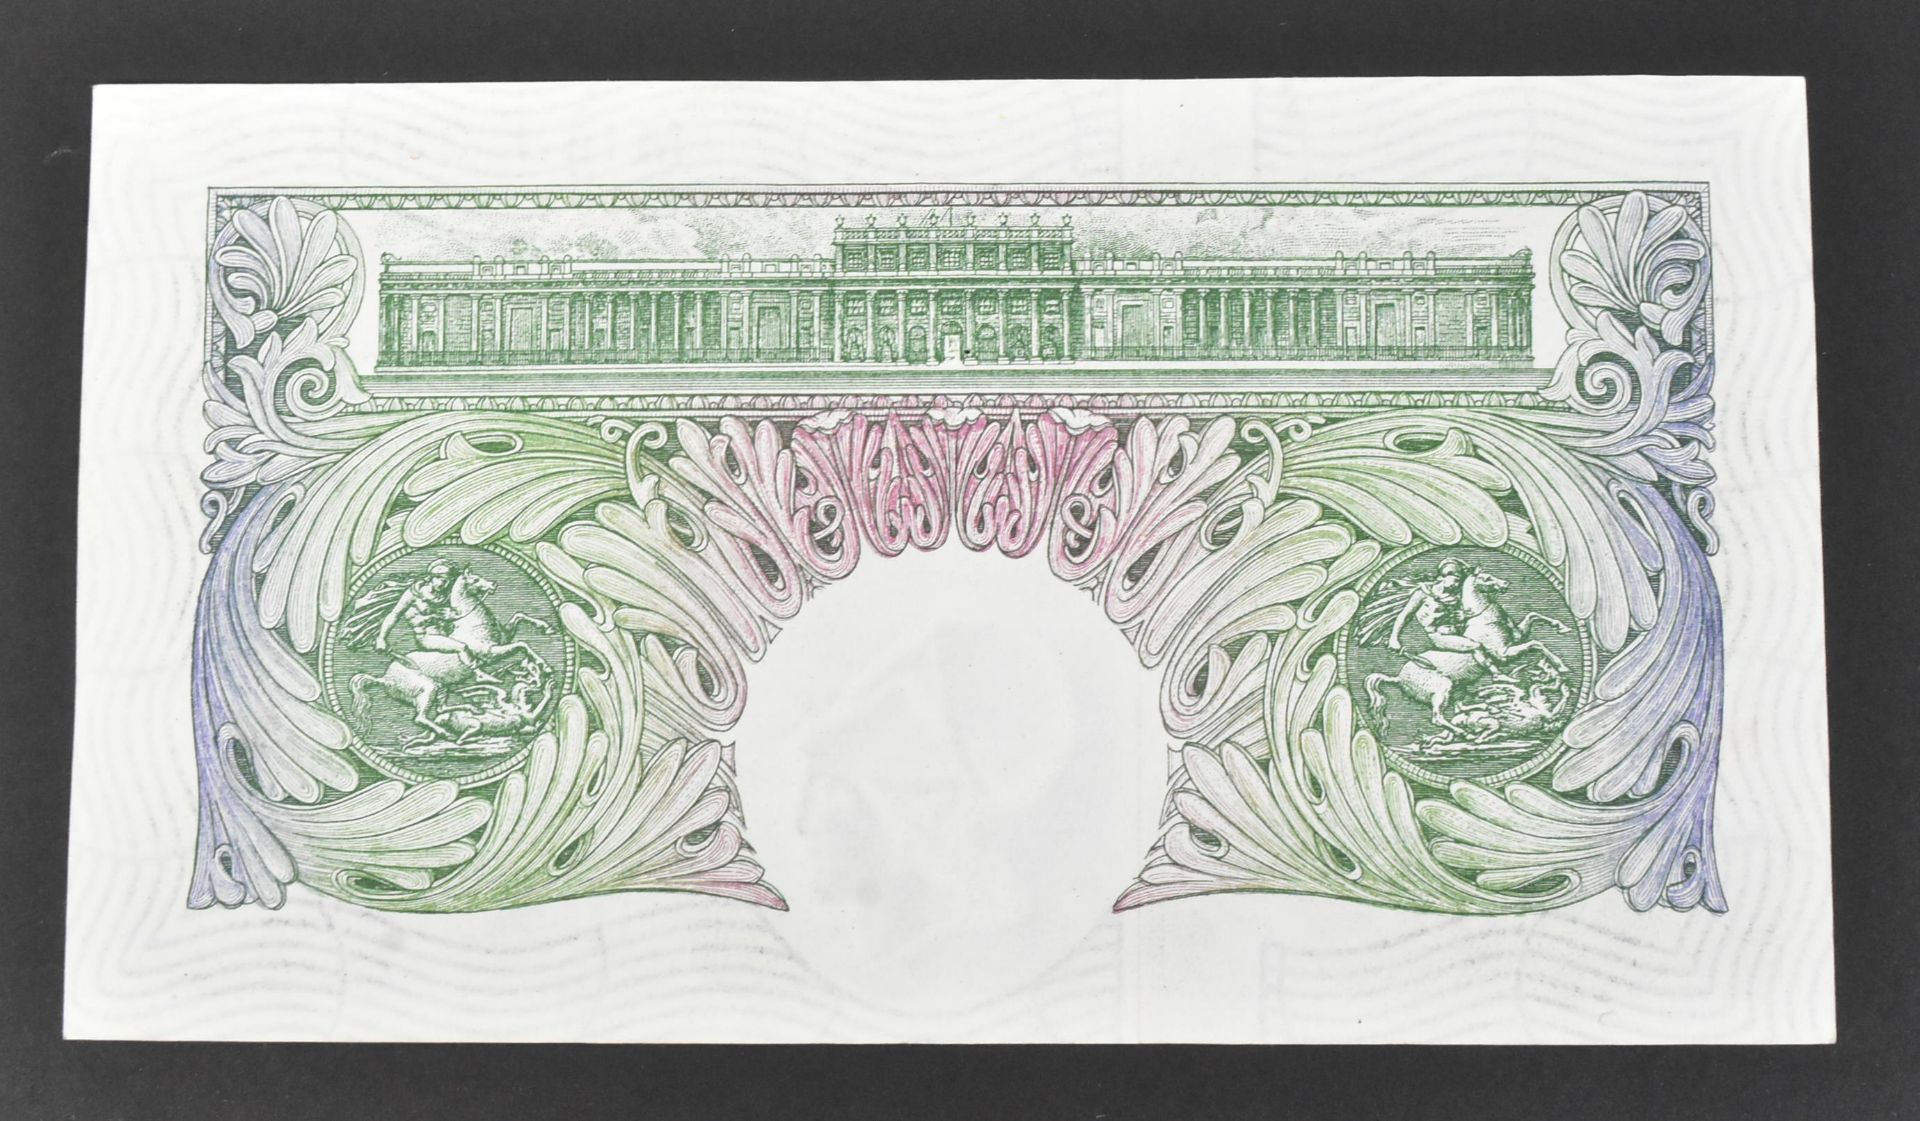 COLLECTION BRITISH UNCIRCULATED BANK NOTES - Image 37 of 61